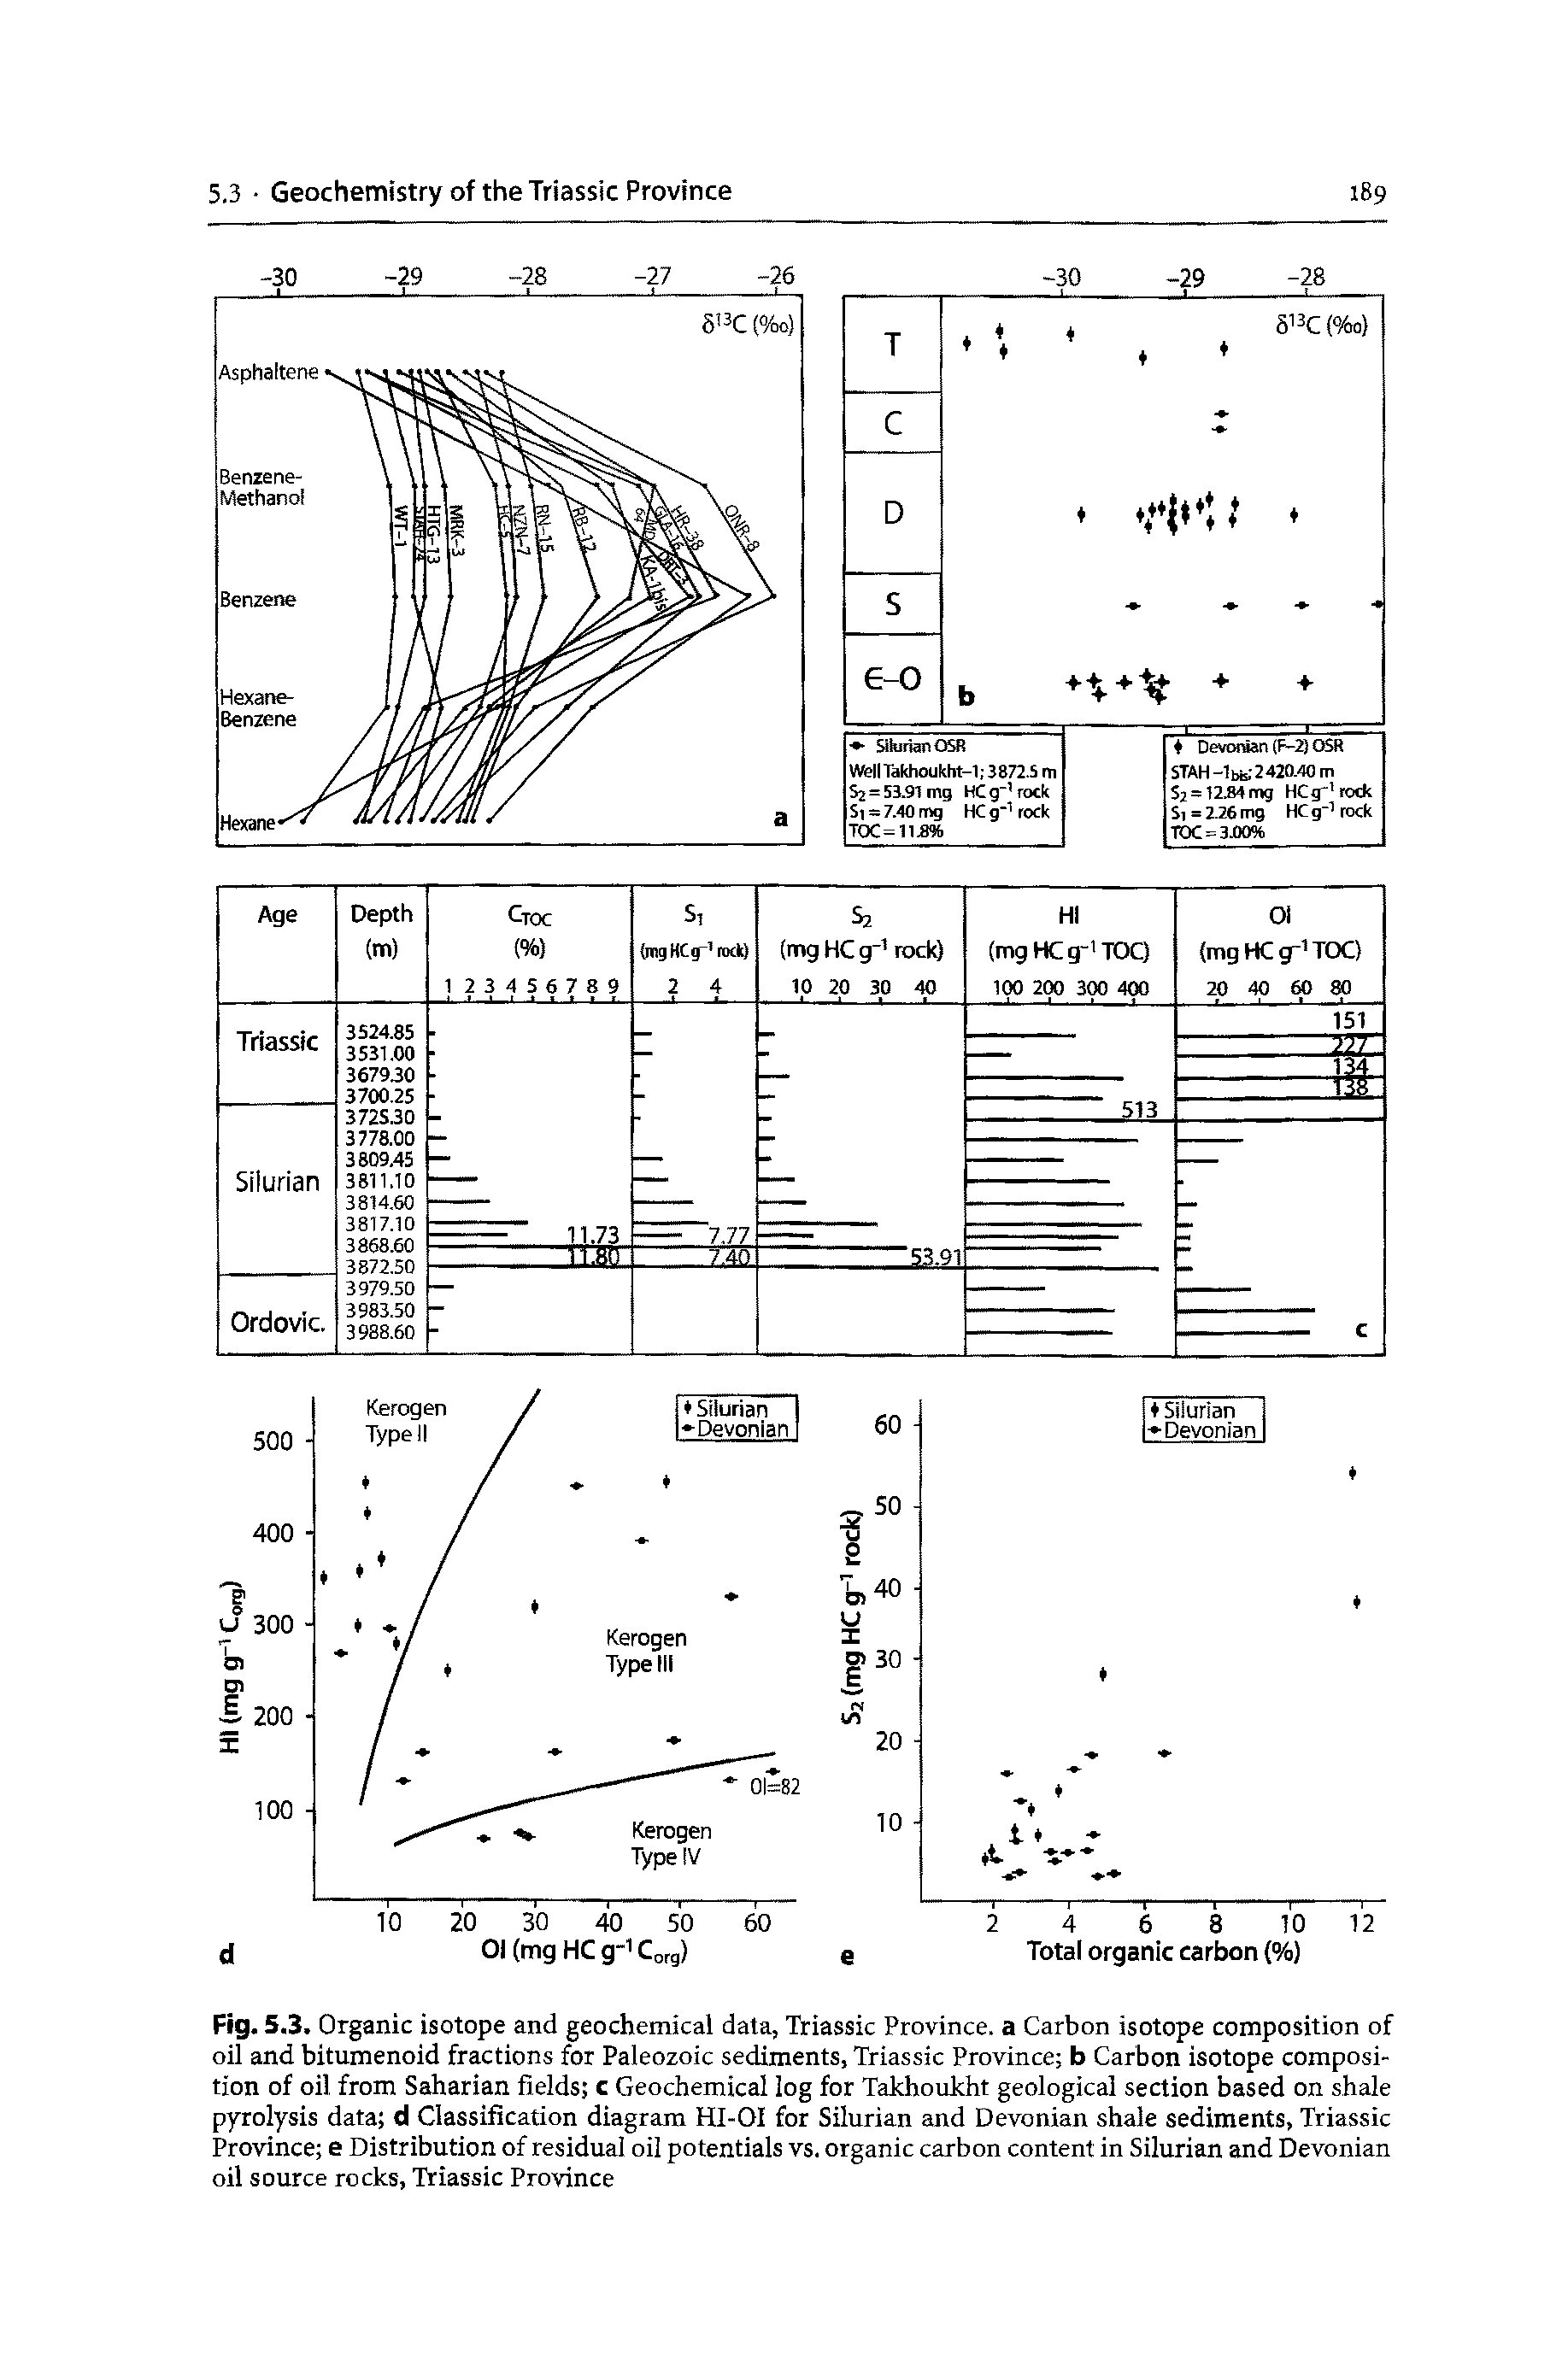 Fig. 5.3. Organic isotope and geochemical data, Triassic Province, a Carbon isotope composition of oil and bitumenoid fractions for Paleozoic sediments, Triassic Province b Carbon isotope composition of oil from Saharian fields c Geochemical log for Takhoukht geological section based on shale pyrolysis data d Classification diagram HI-OI for Silurian and Devonian shale sediments, Triassic Province e Distribution of residual oil potentials vs. organic carbon content in Silurian and Devonian oil source rocks, Triassic Province...